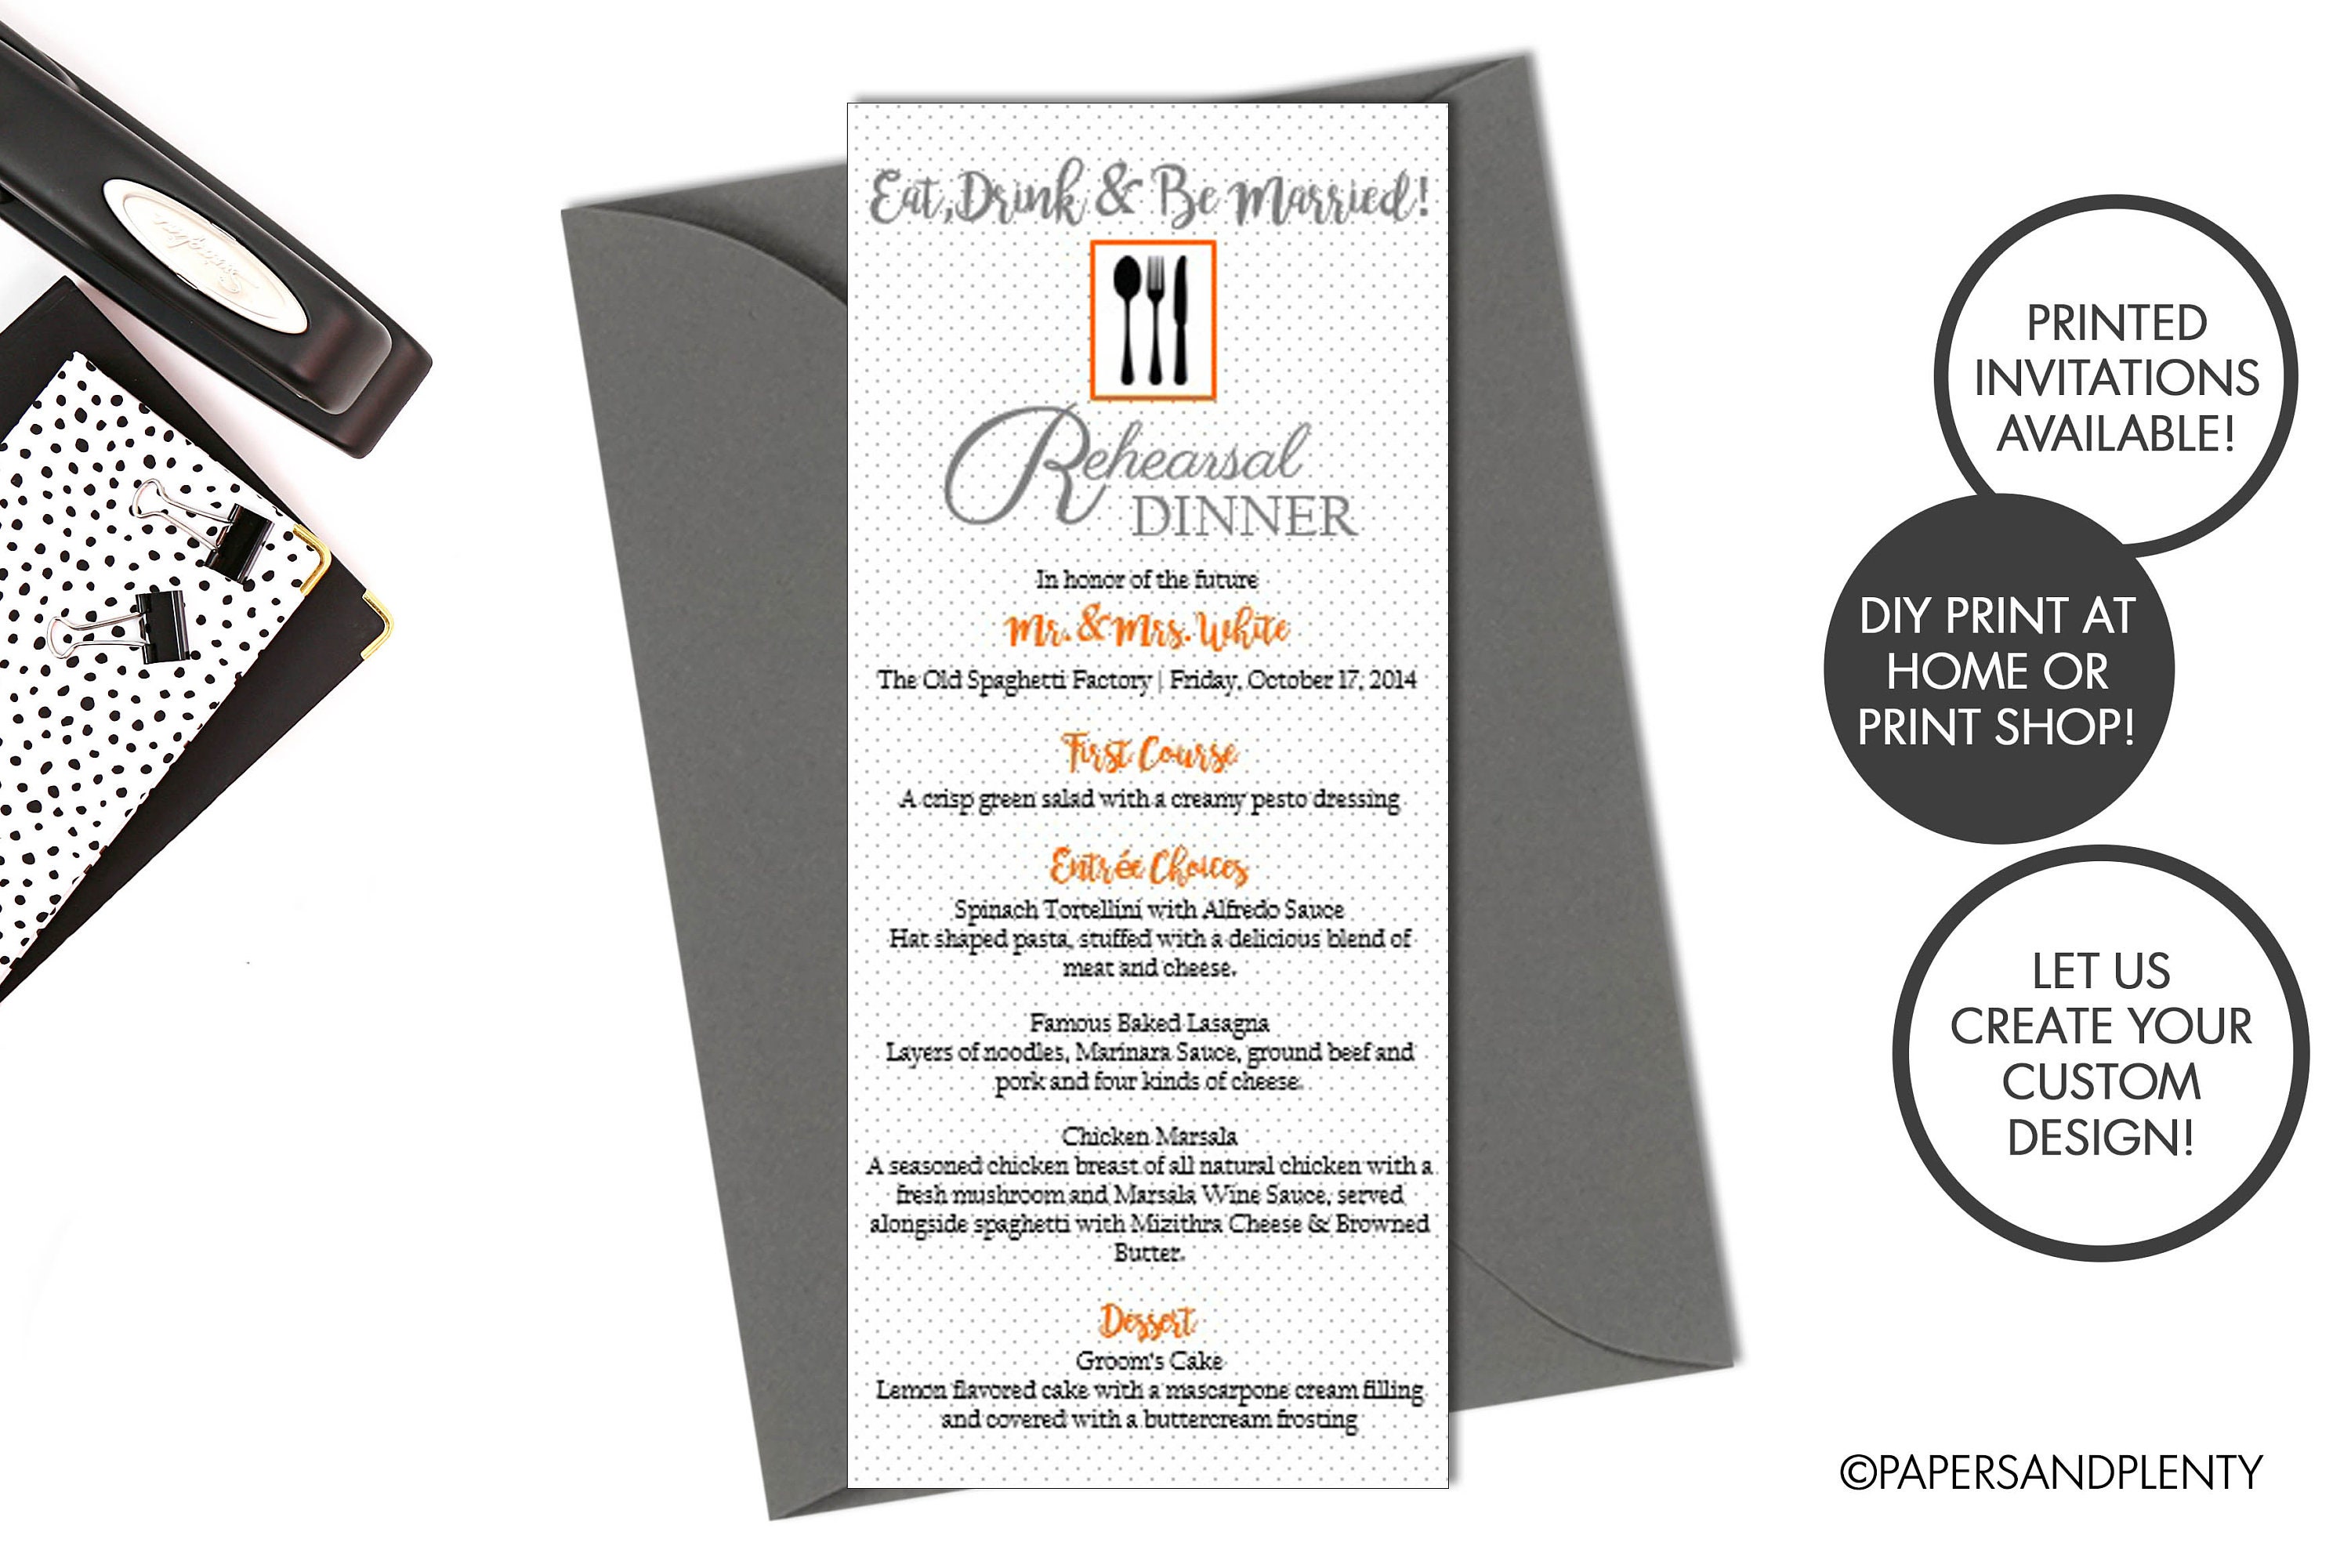 Wedding Rehearsal Dinner Gift Tags, Personalized Simple Digital Download  Printable — Wedding Rehearsal Dinner & Welcome Party Planning Ideas, Advice  